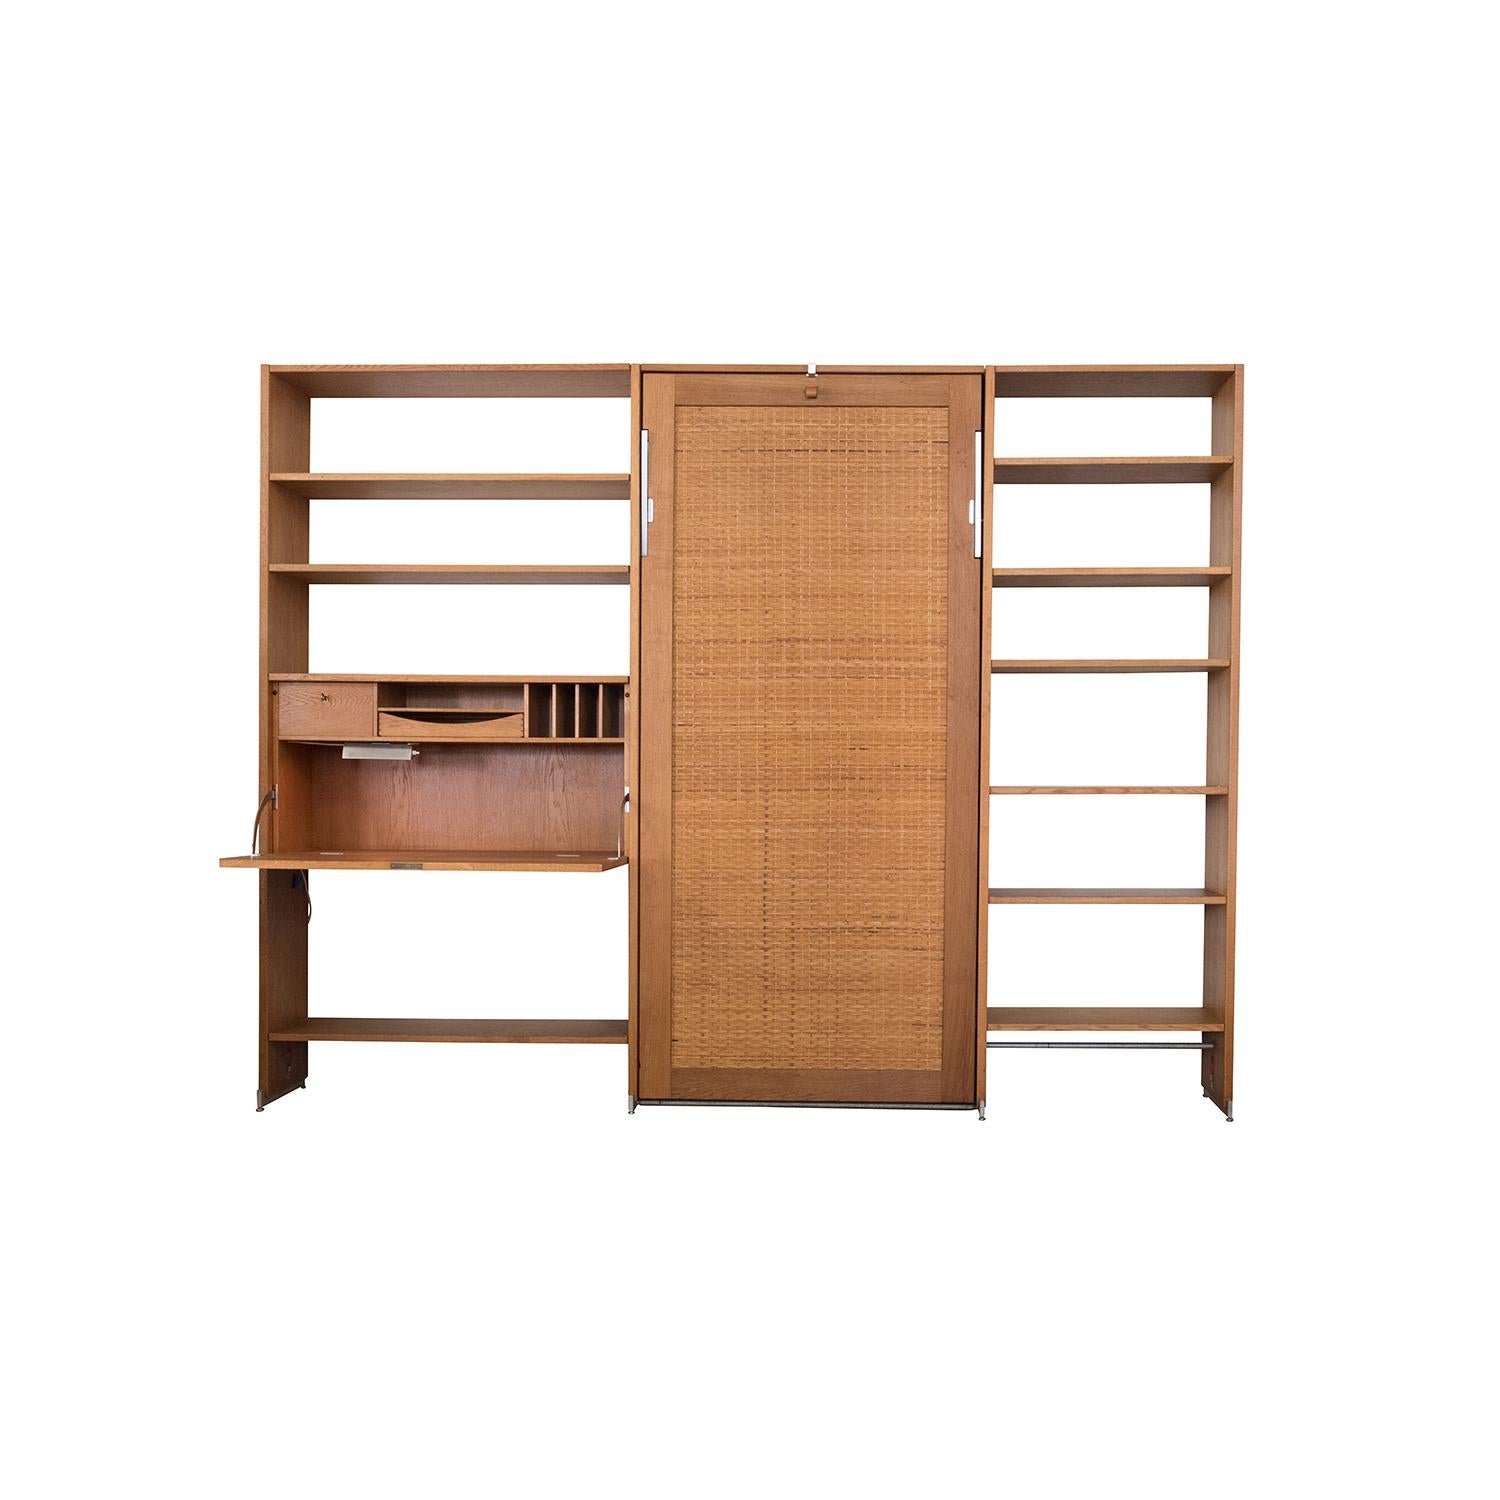 Danish Modern RY100 Murphy bed secretary and shelving system by Hans J Wegner for Ry. This Classic Murphy bed boasts a lovely cane front with heavyweight steel hardware and drop down bed upholstered in original Danish wool (we'll replace the wool in